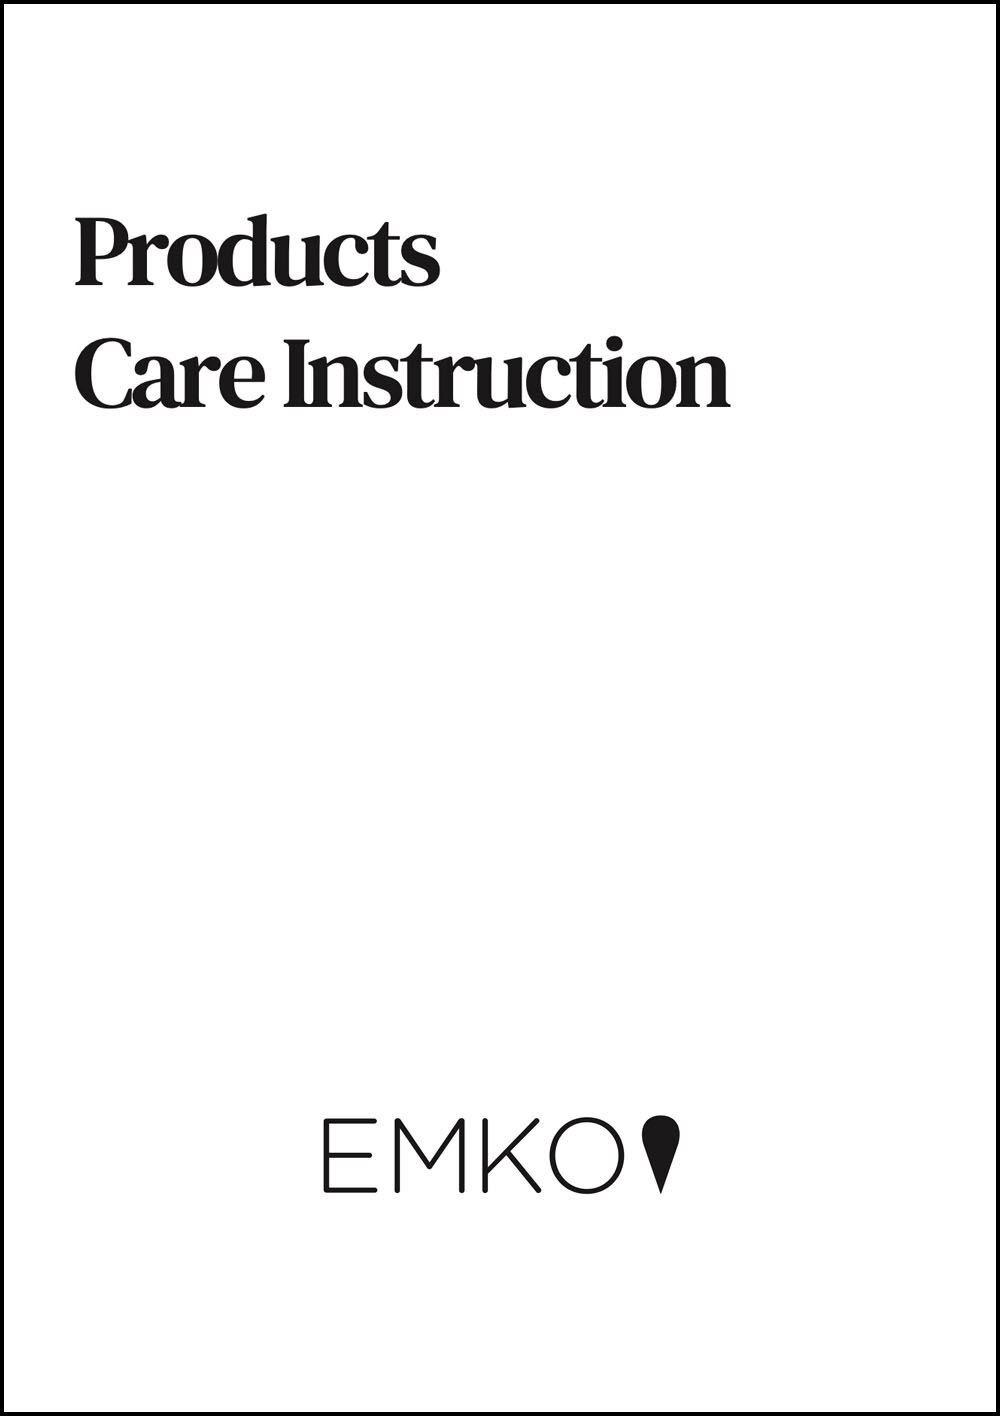 Products Care Instruction.jpg